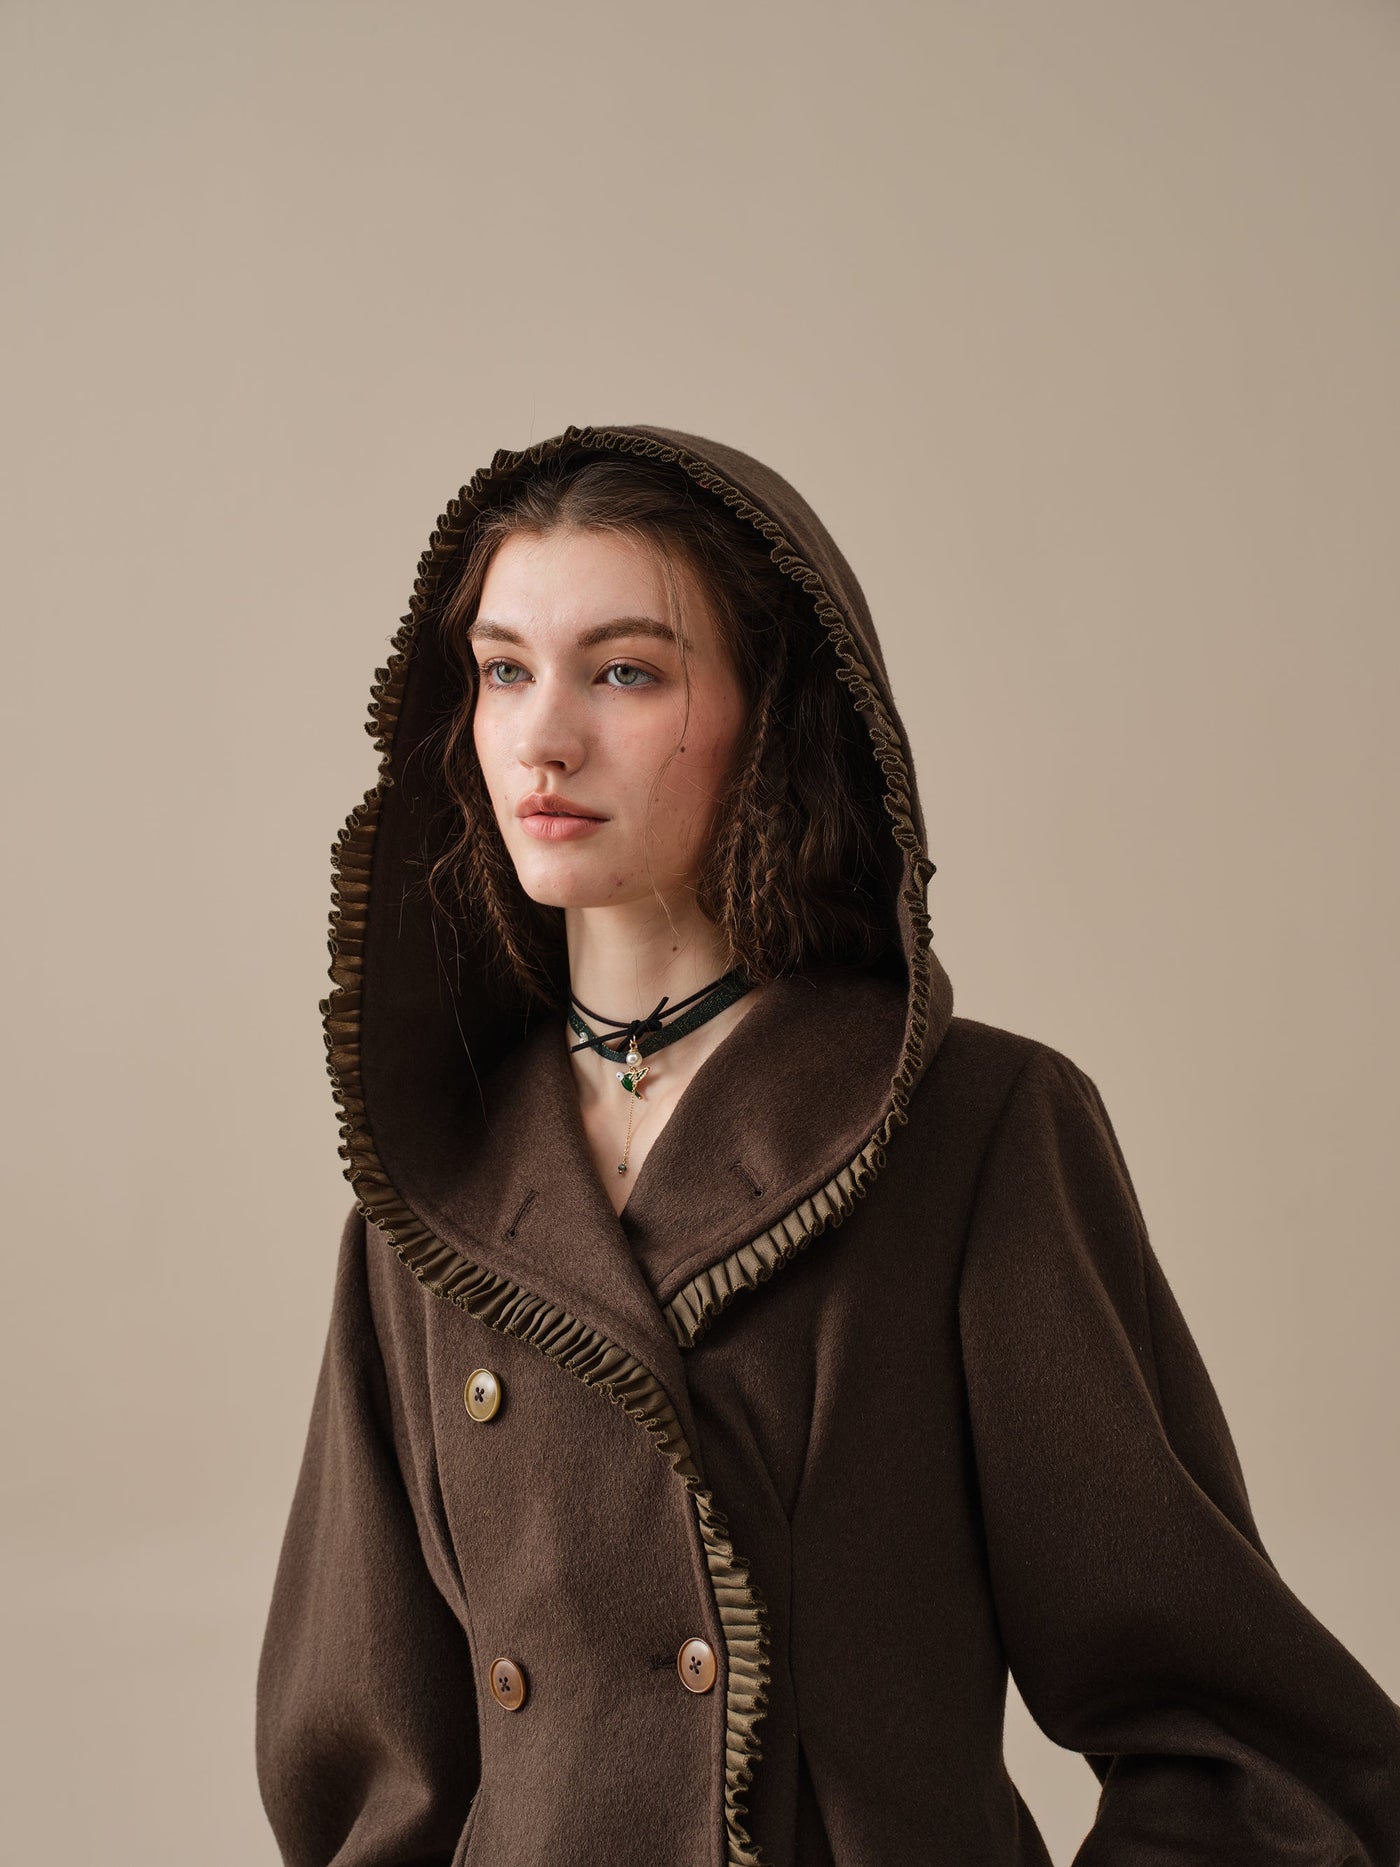 JACQUES 25| LONG HOODED VICTORIAN COAT (100% WOOL)